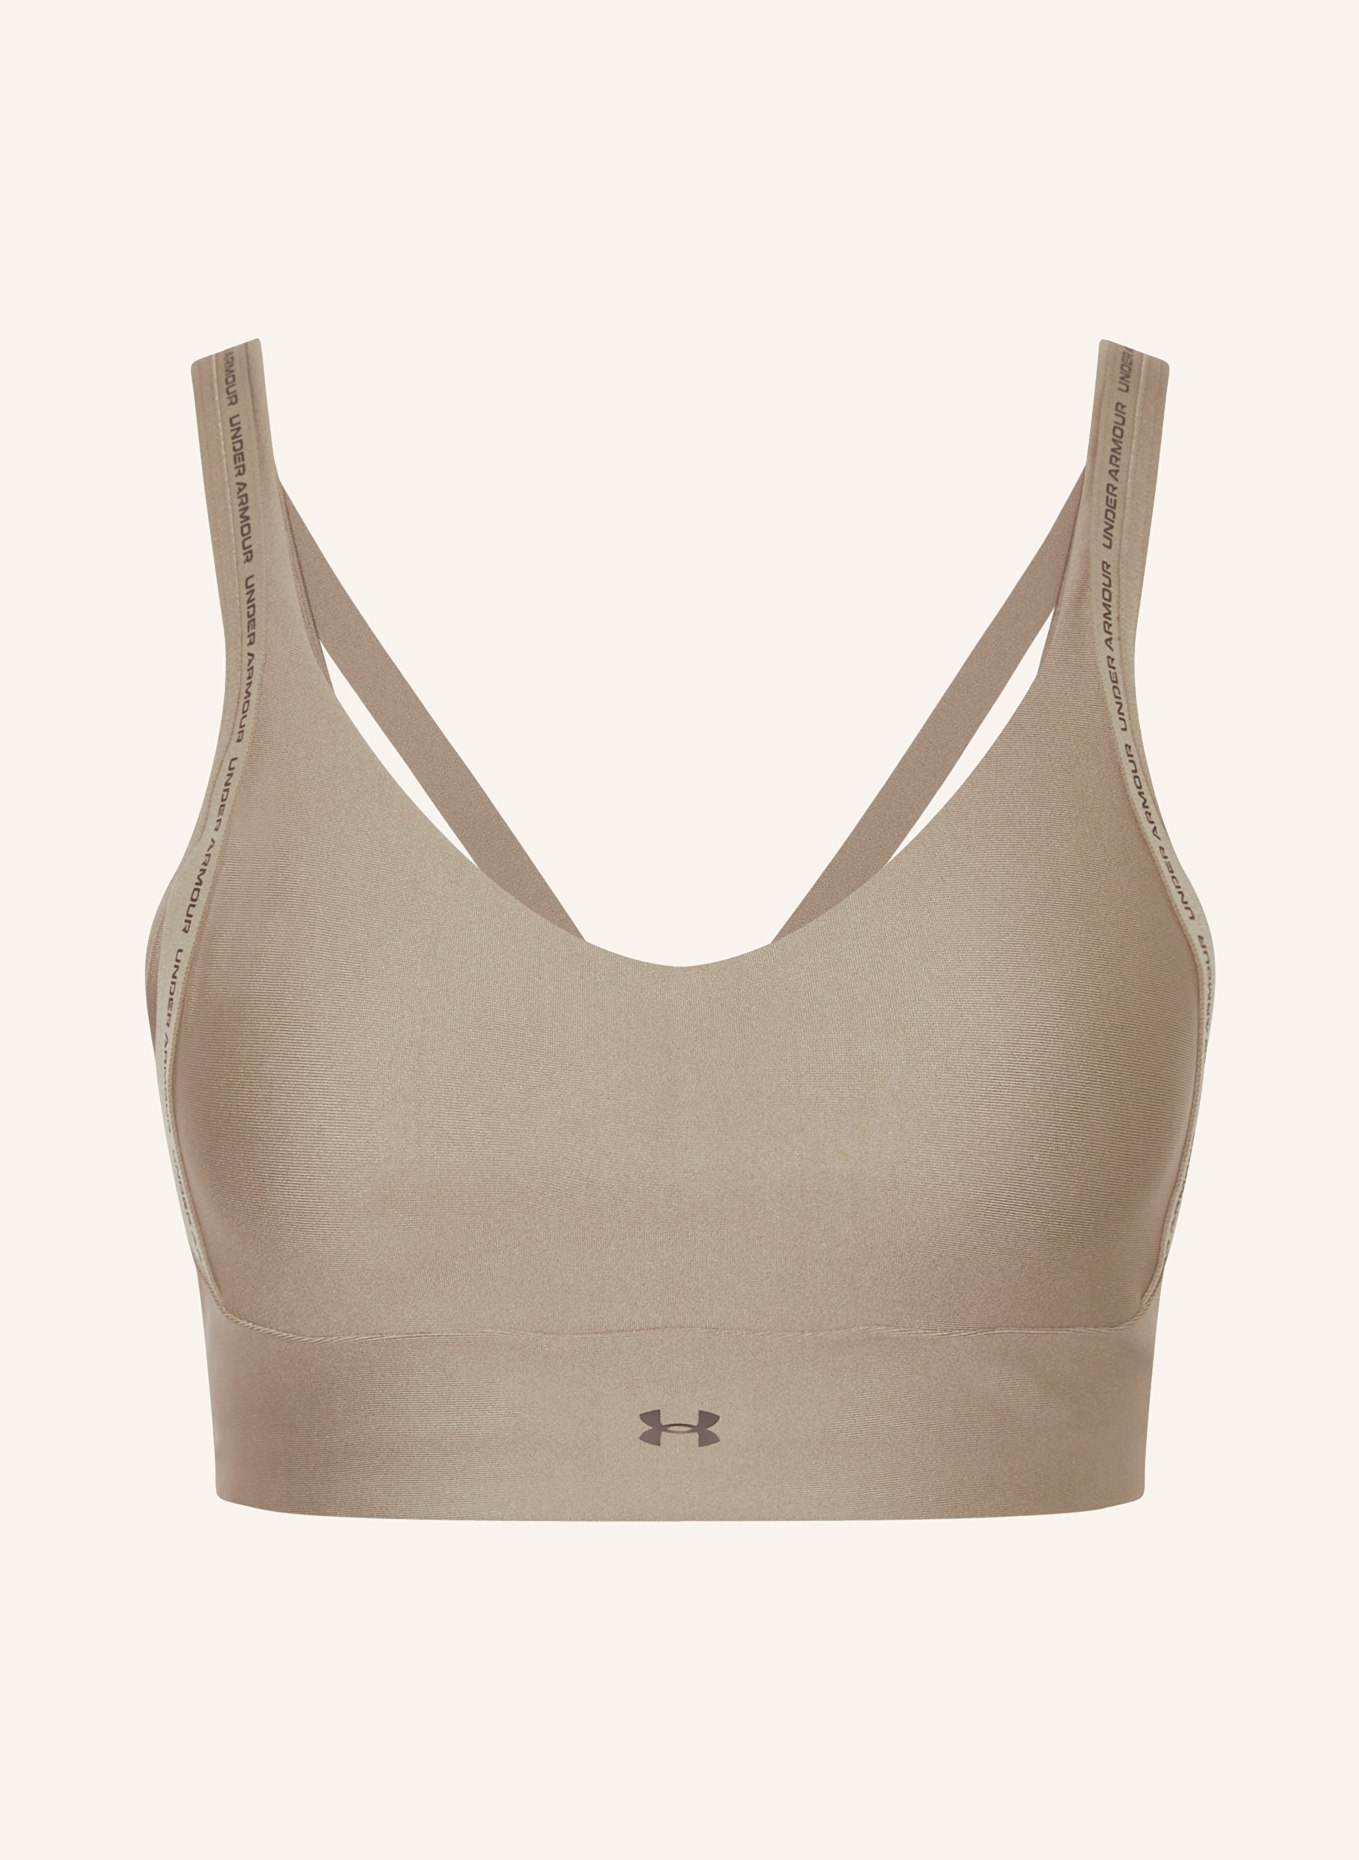 UNDER ARMOUR Sports bra INFINITY 2.0, Color: TAUPE (Image 1)